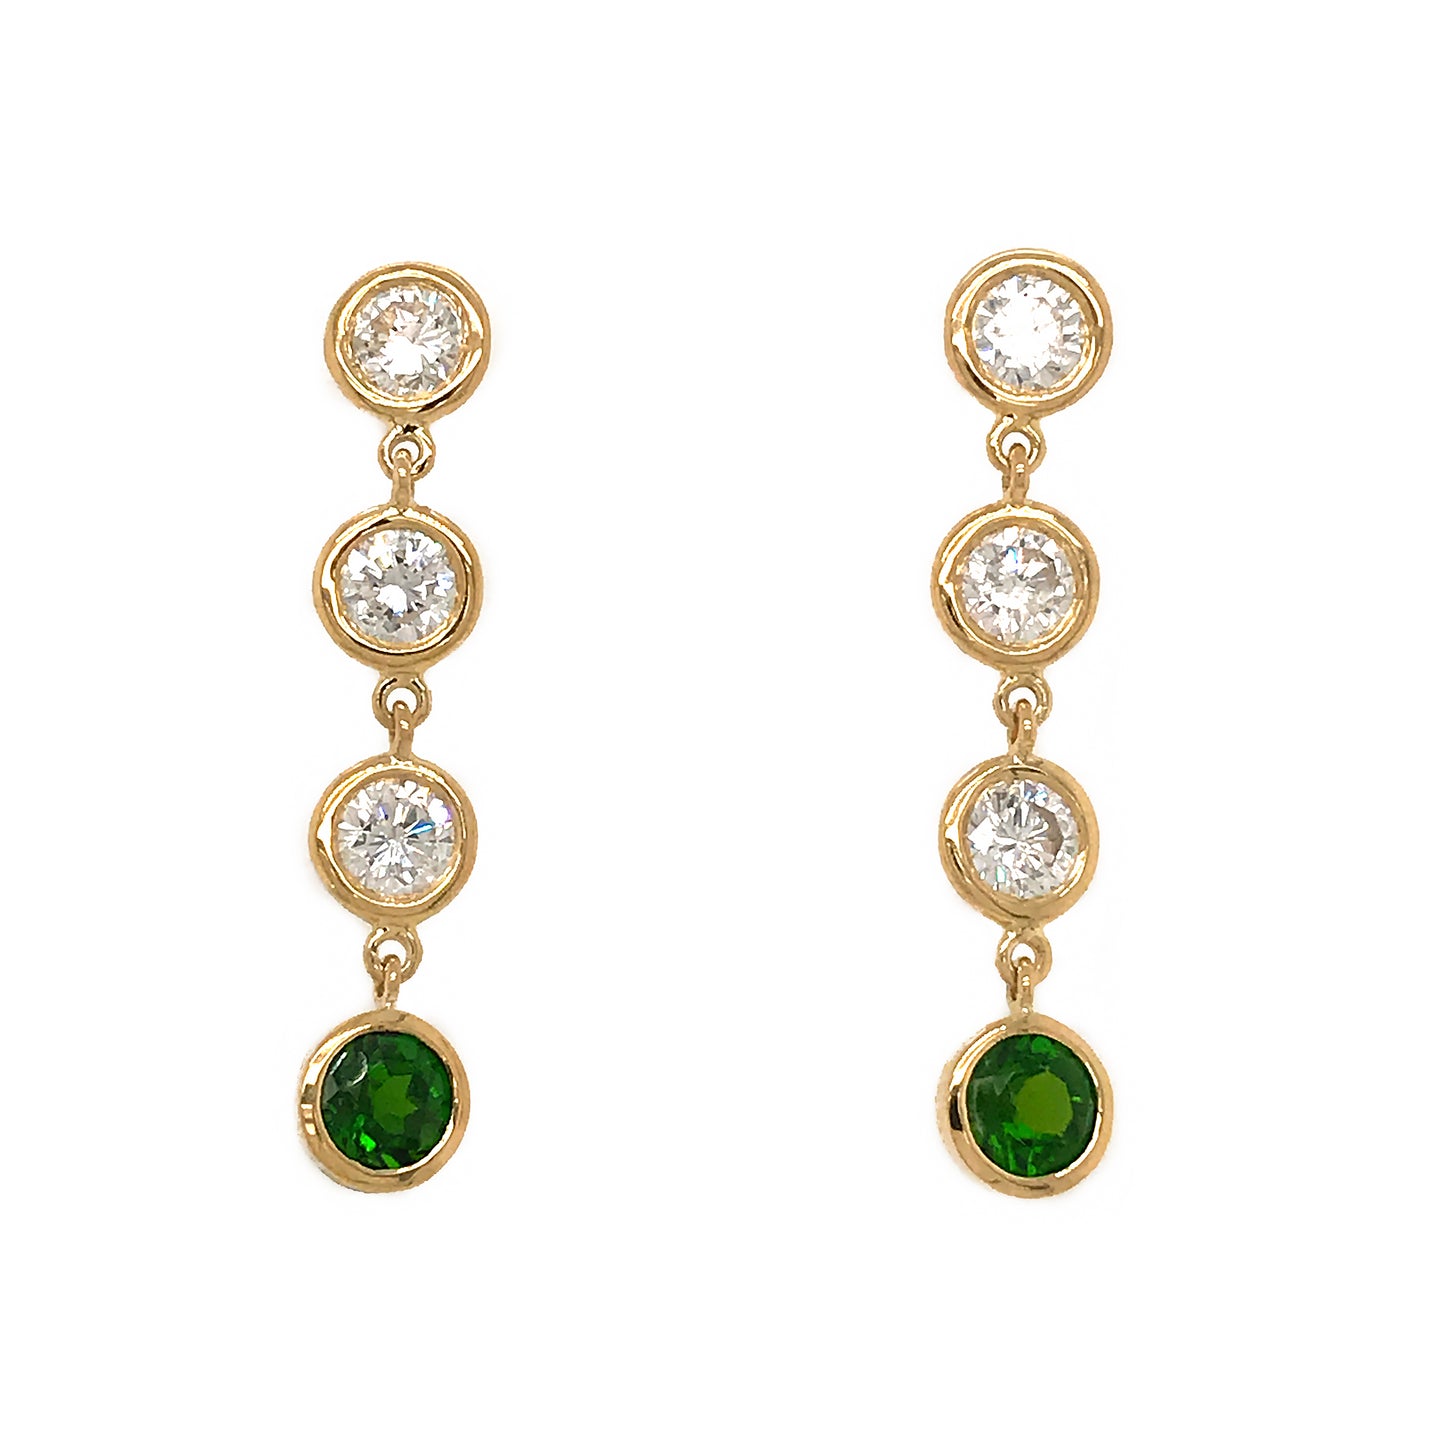 FAB DROPS 18K Yellow Gold Round Diamond and Chrome Diopside Drop Earrings